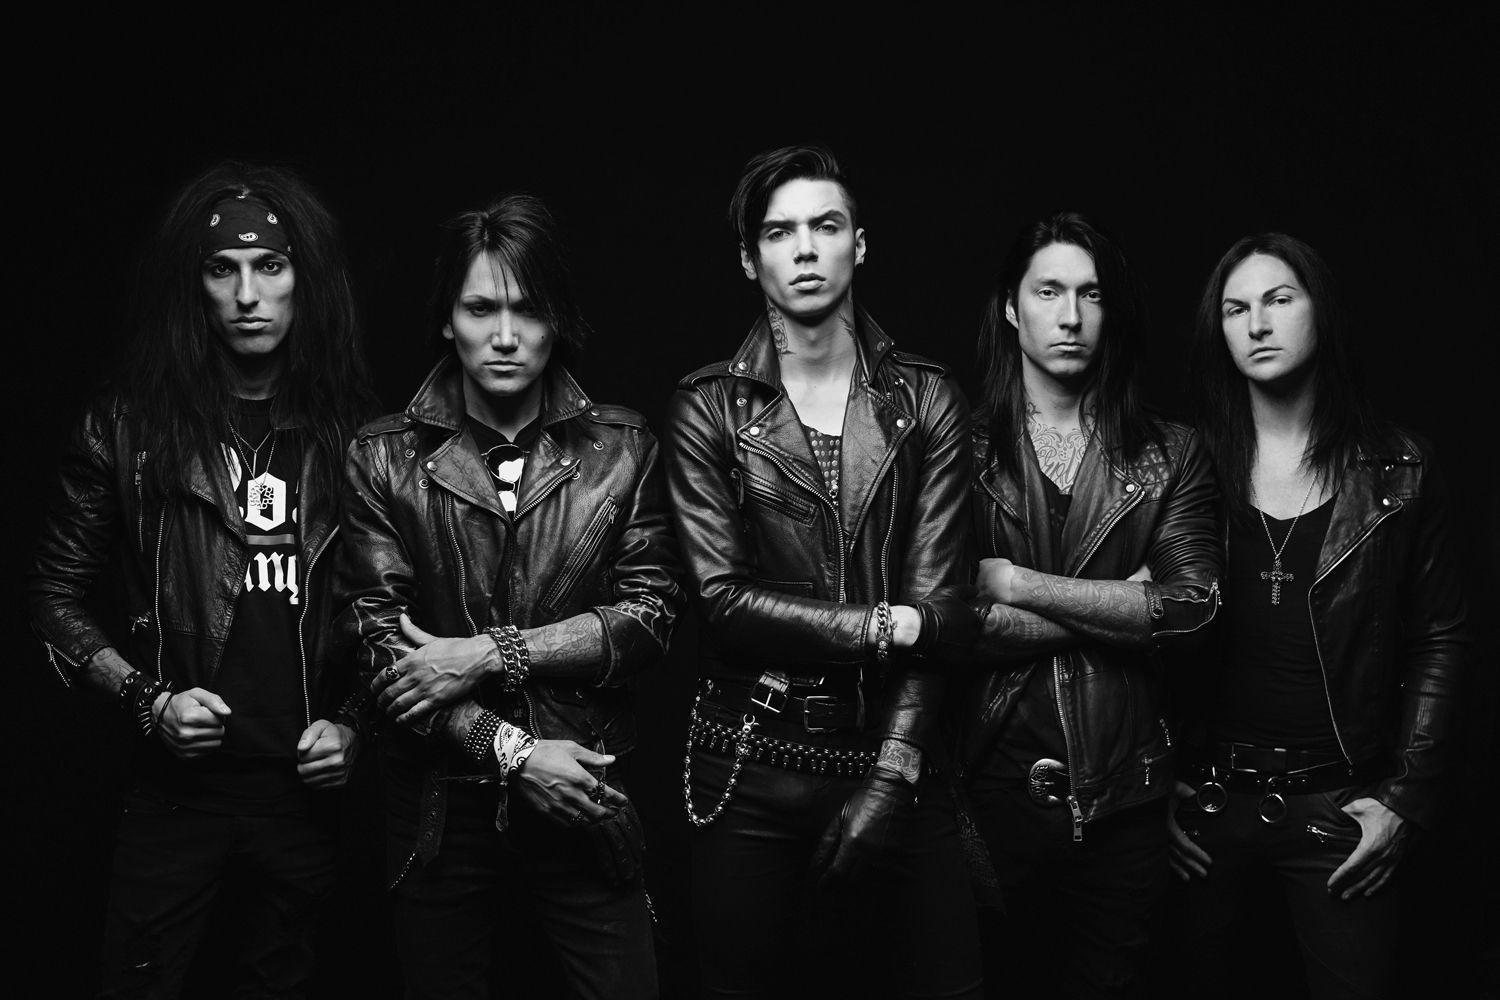 Black Veil Brides talks exclusively to Overdrive